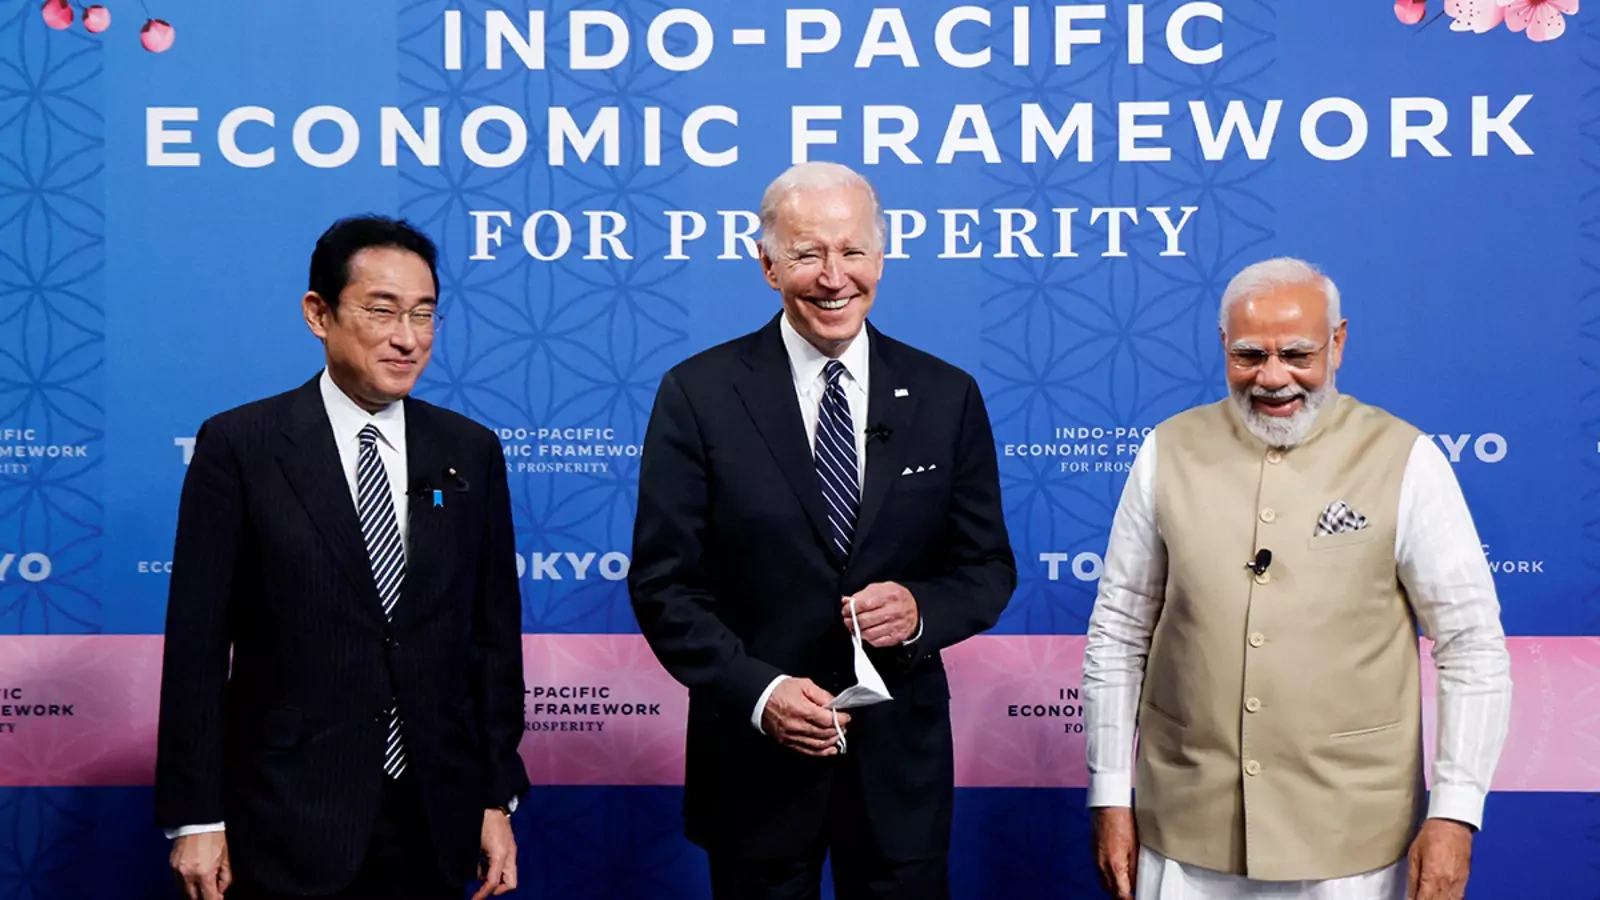 From left to right, Japanese Prime Minister Fumio Kishida, U.S. President Joe Biden, and Indian Prime Minister Narendra Modi attend the Indo-Pacific Economic Framework (IPEF) launch event in Tokyo in May 2022.